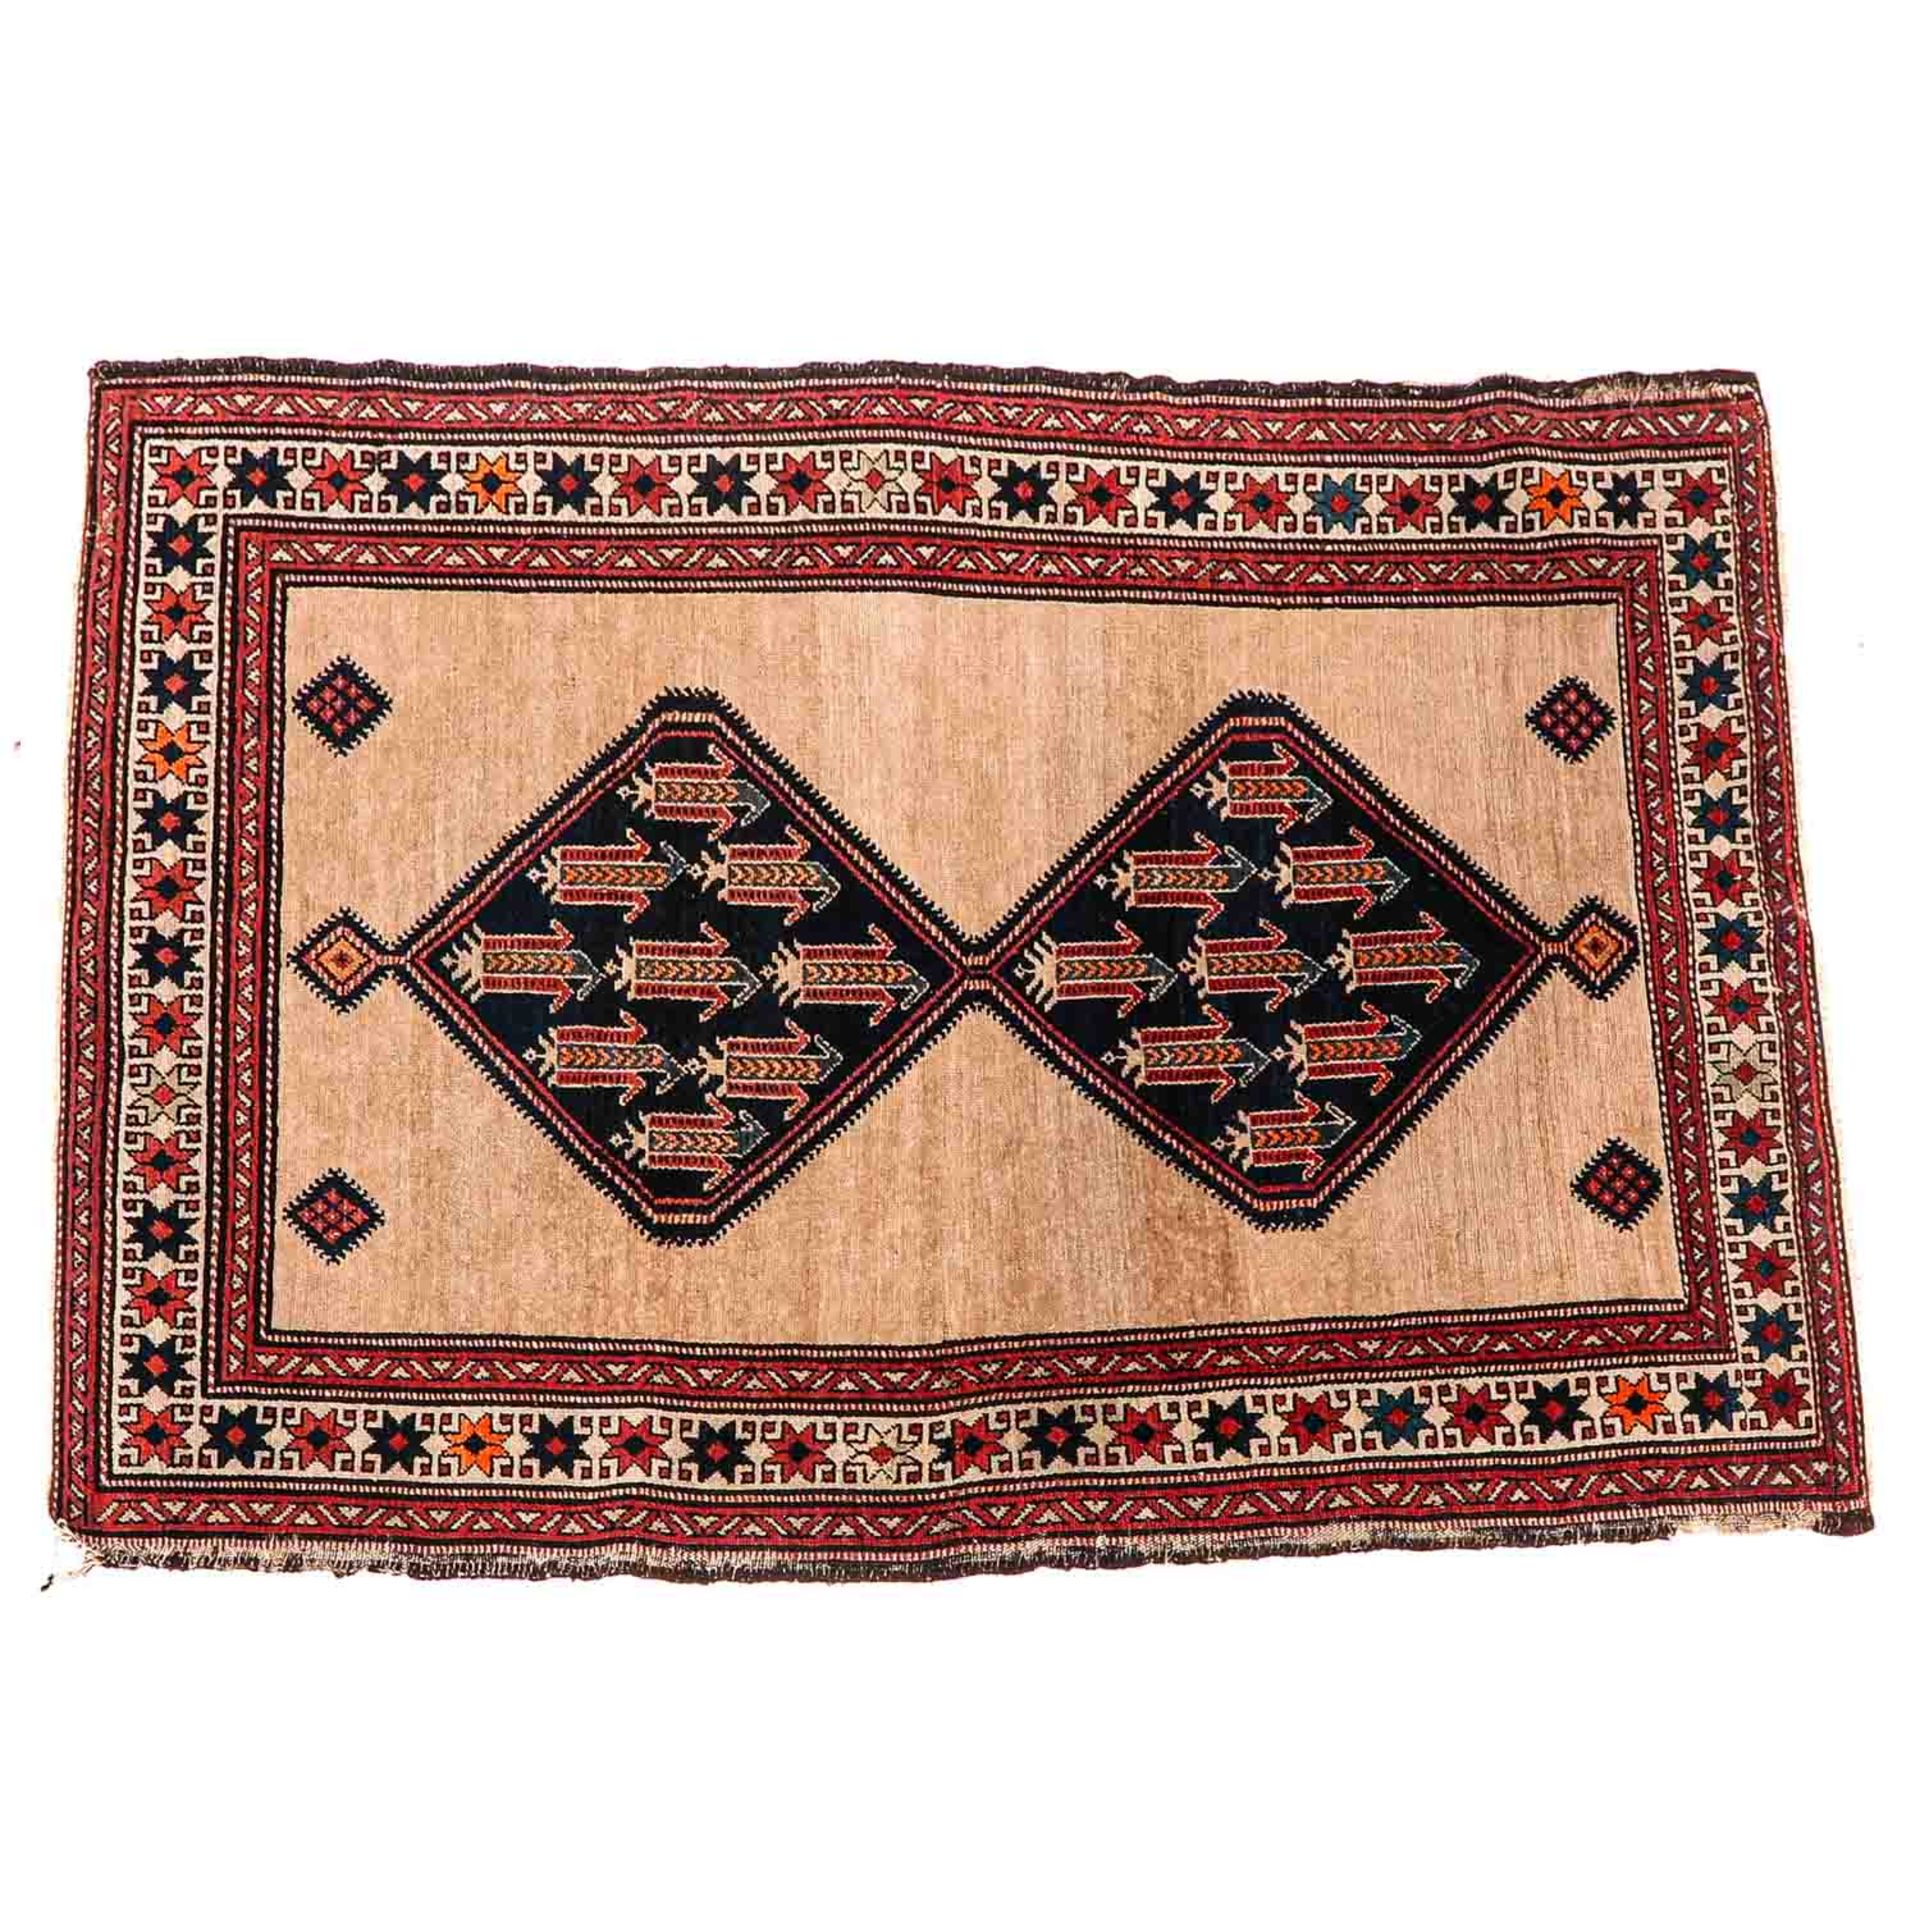 A Collection of 4 Persian Carpets - Image 6 of 9